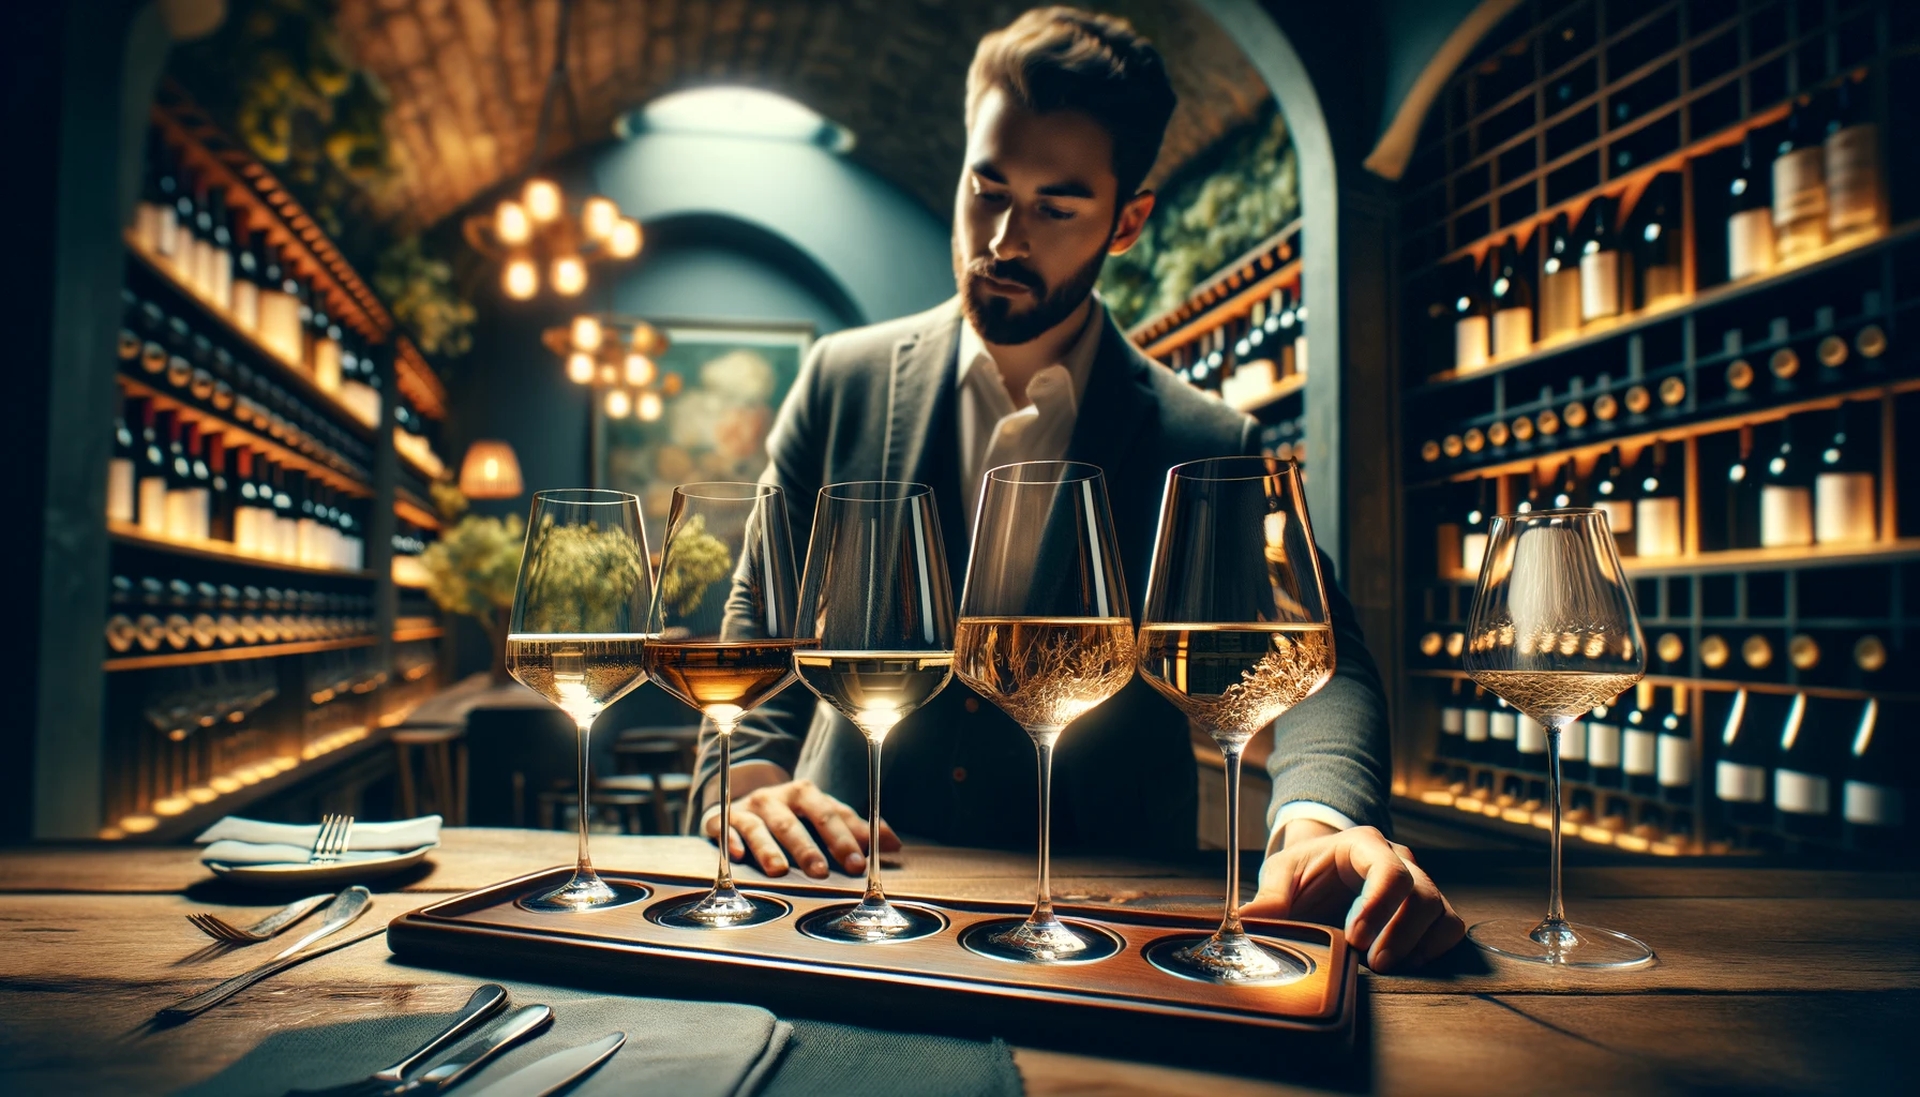 image depicting an intimate tasting room scene, where a sommelier presents a flight of the most exquisite dry white wines. Each glass is illuminated under soft lighting, showcasing the wines delicate hues and inviting aromas. - image credit: Encyclopedia Wines